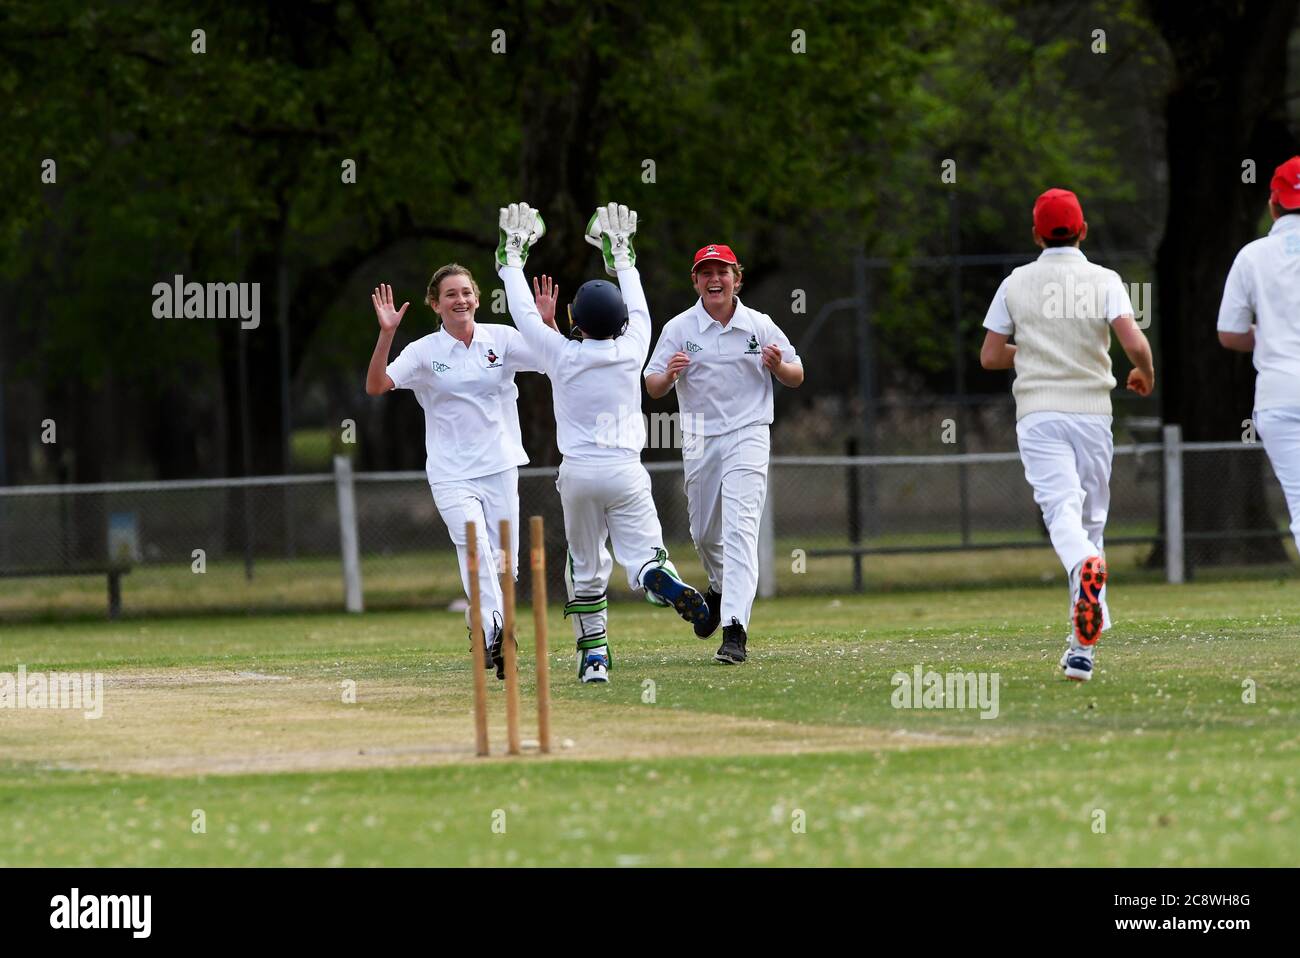 Players celebrate the dismissal of a batsman during an under 16s cricket match in Victoria, Australia Stock Photo